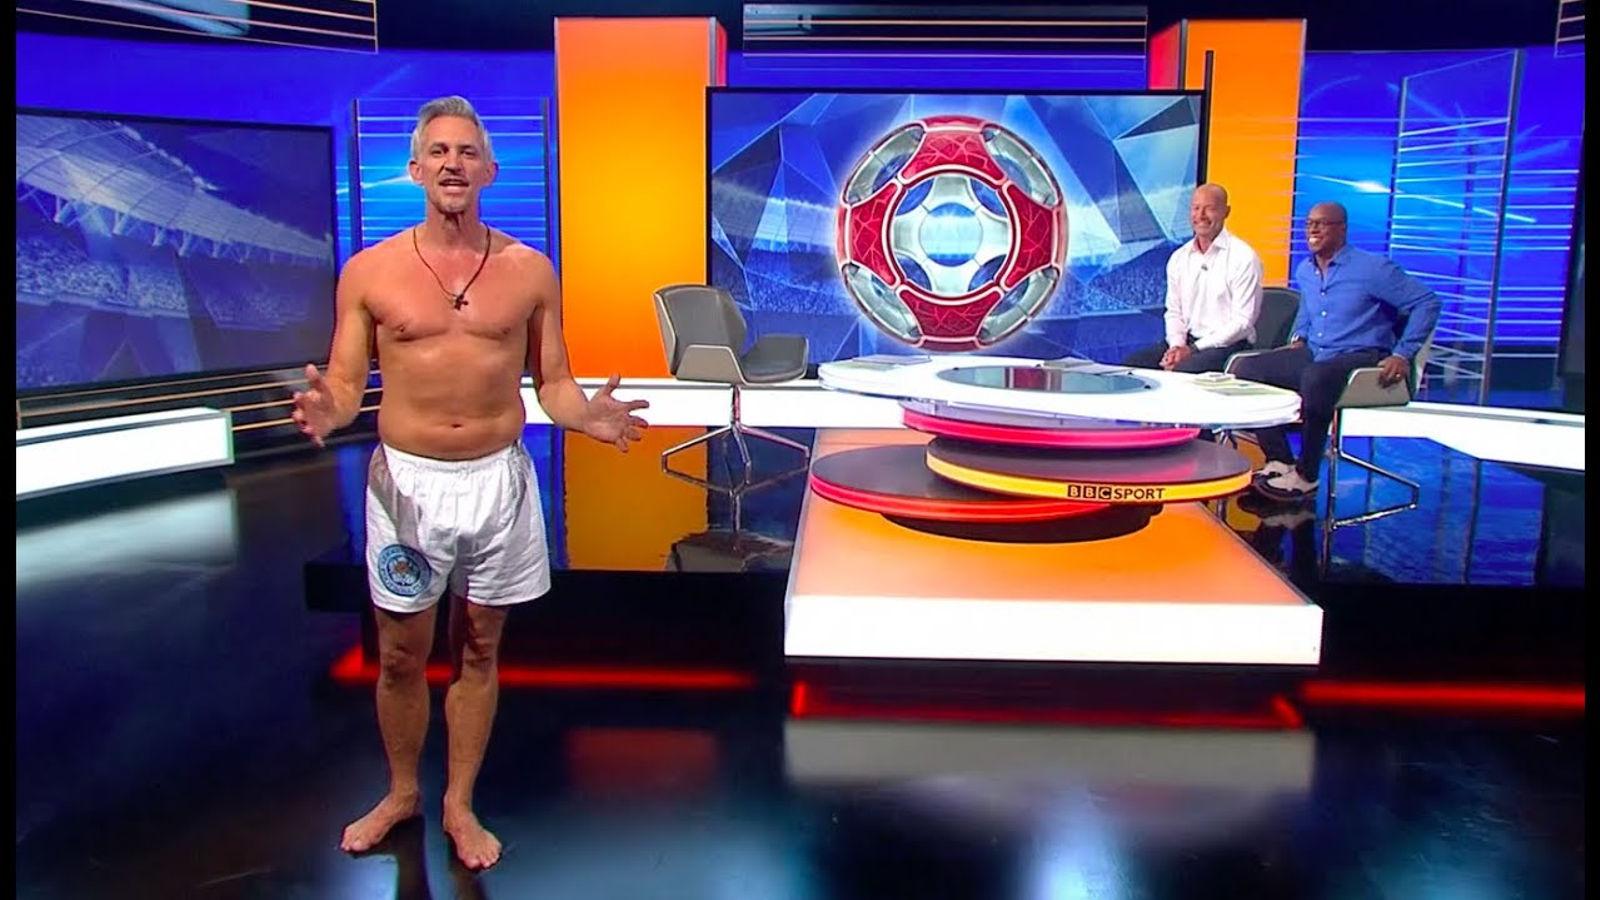 Match of the Day presenter Gary Lineker presenting the programme in his underwear